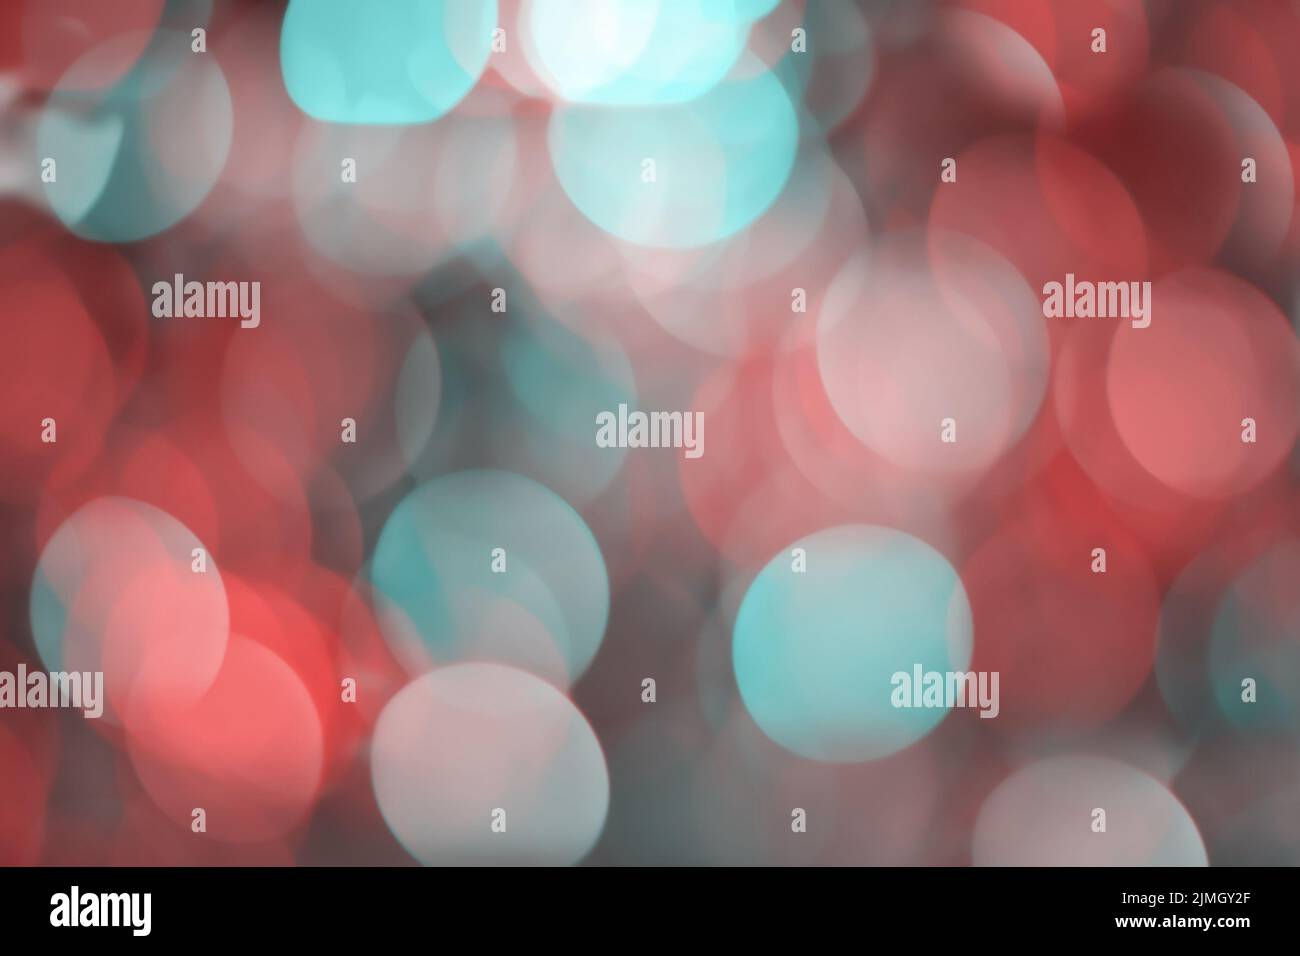 Bokeh lights background, soft focus red and green blurry light spots Stock Photo